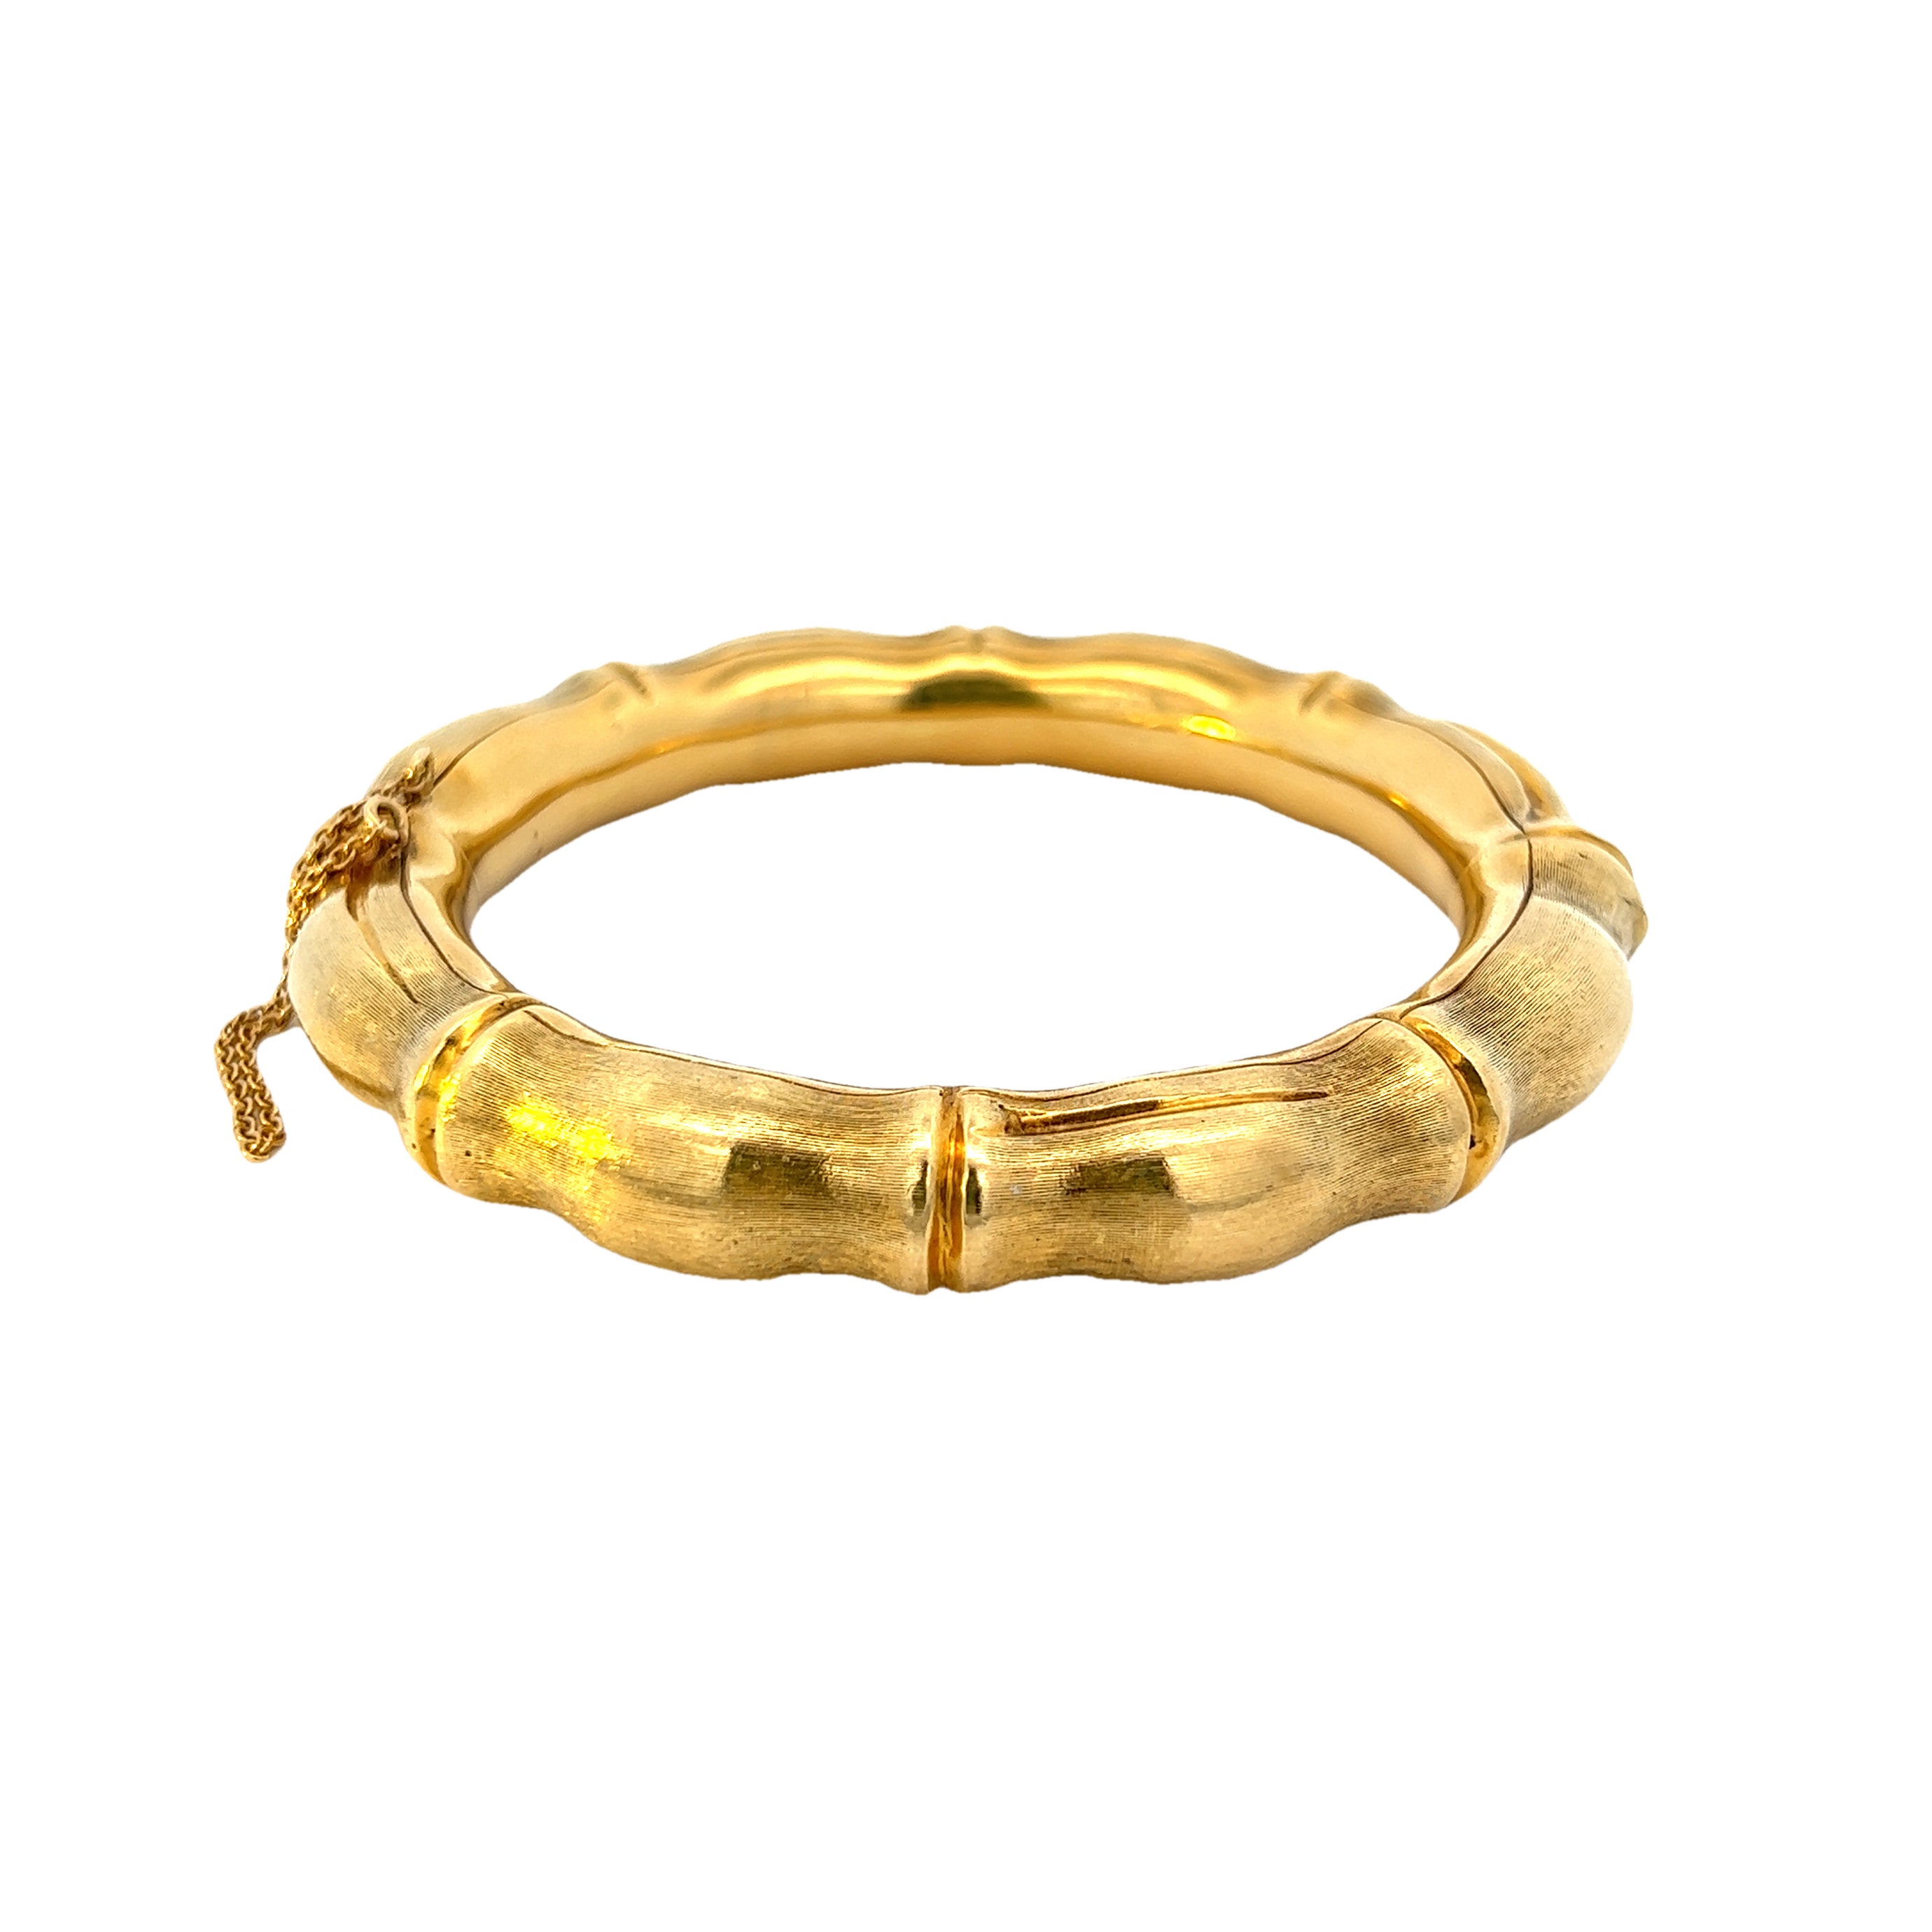 Gold Bracelets and Bangles Archives - Sarah Cole Jewellery